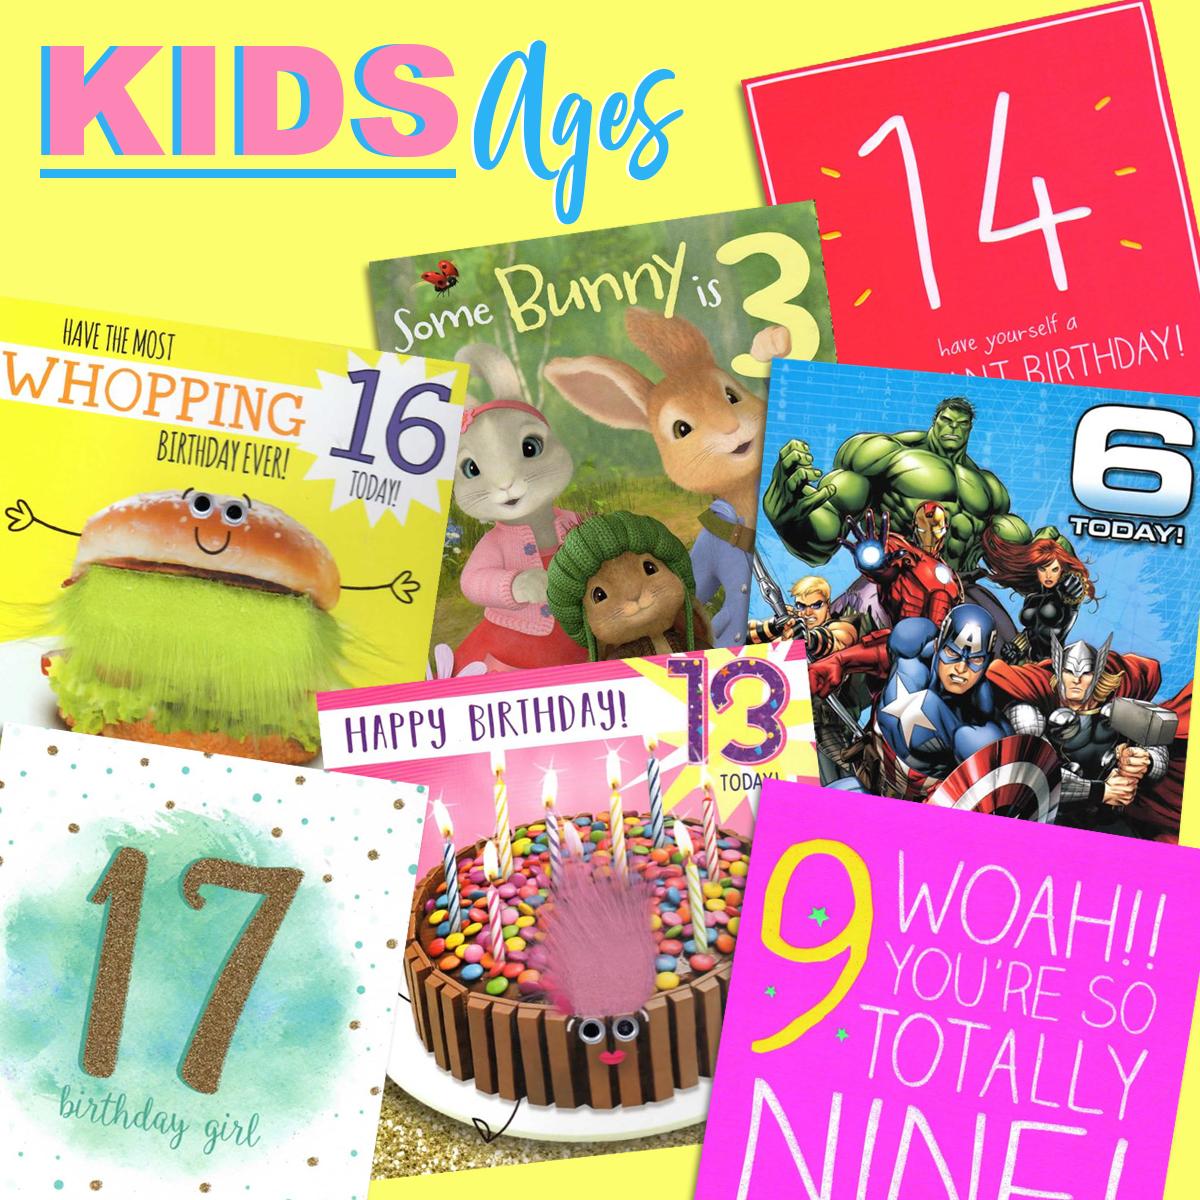 A Selection Of Cards To Show The Depth Of Range In Our Kids Ages Card Section